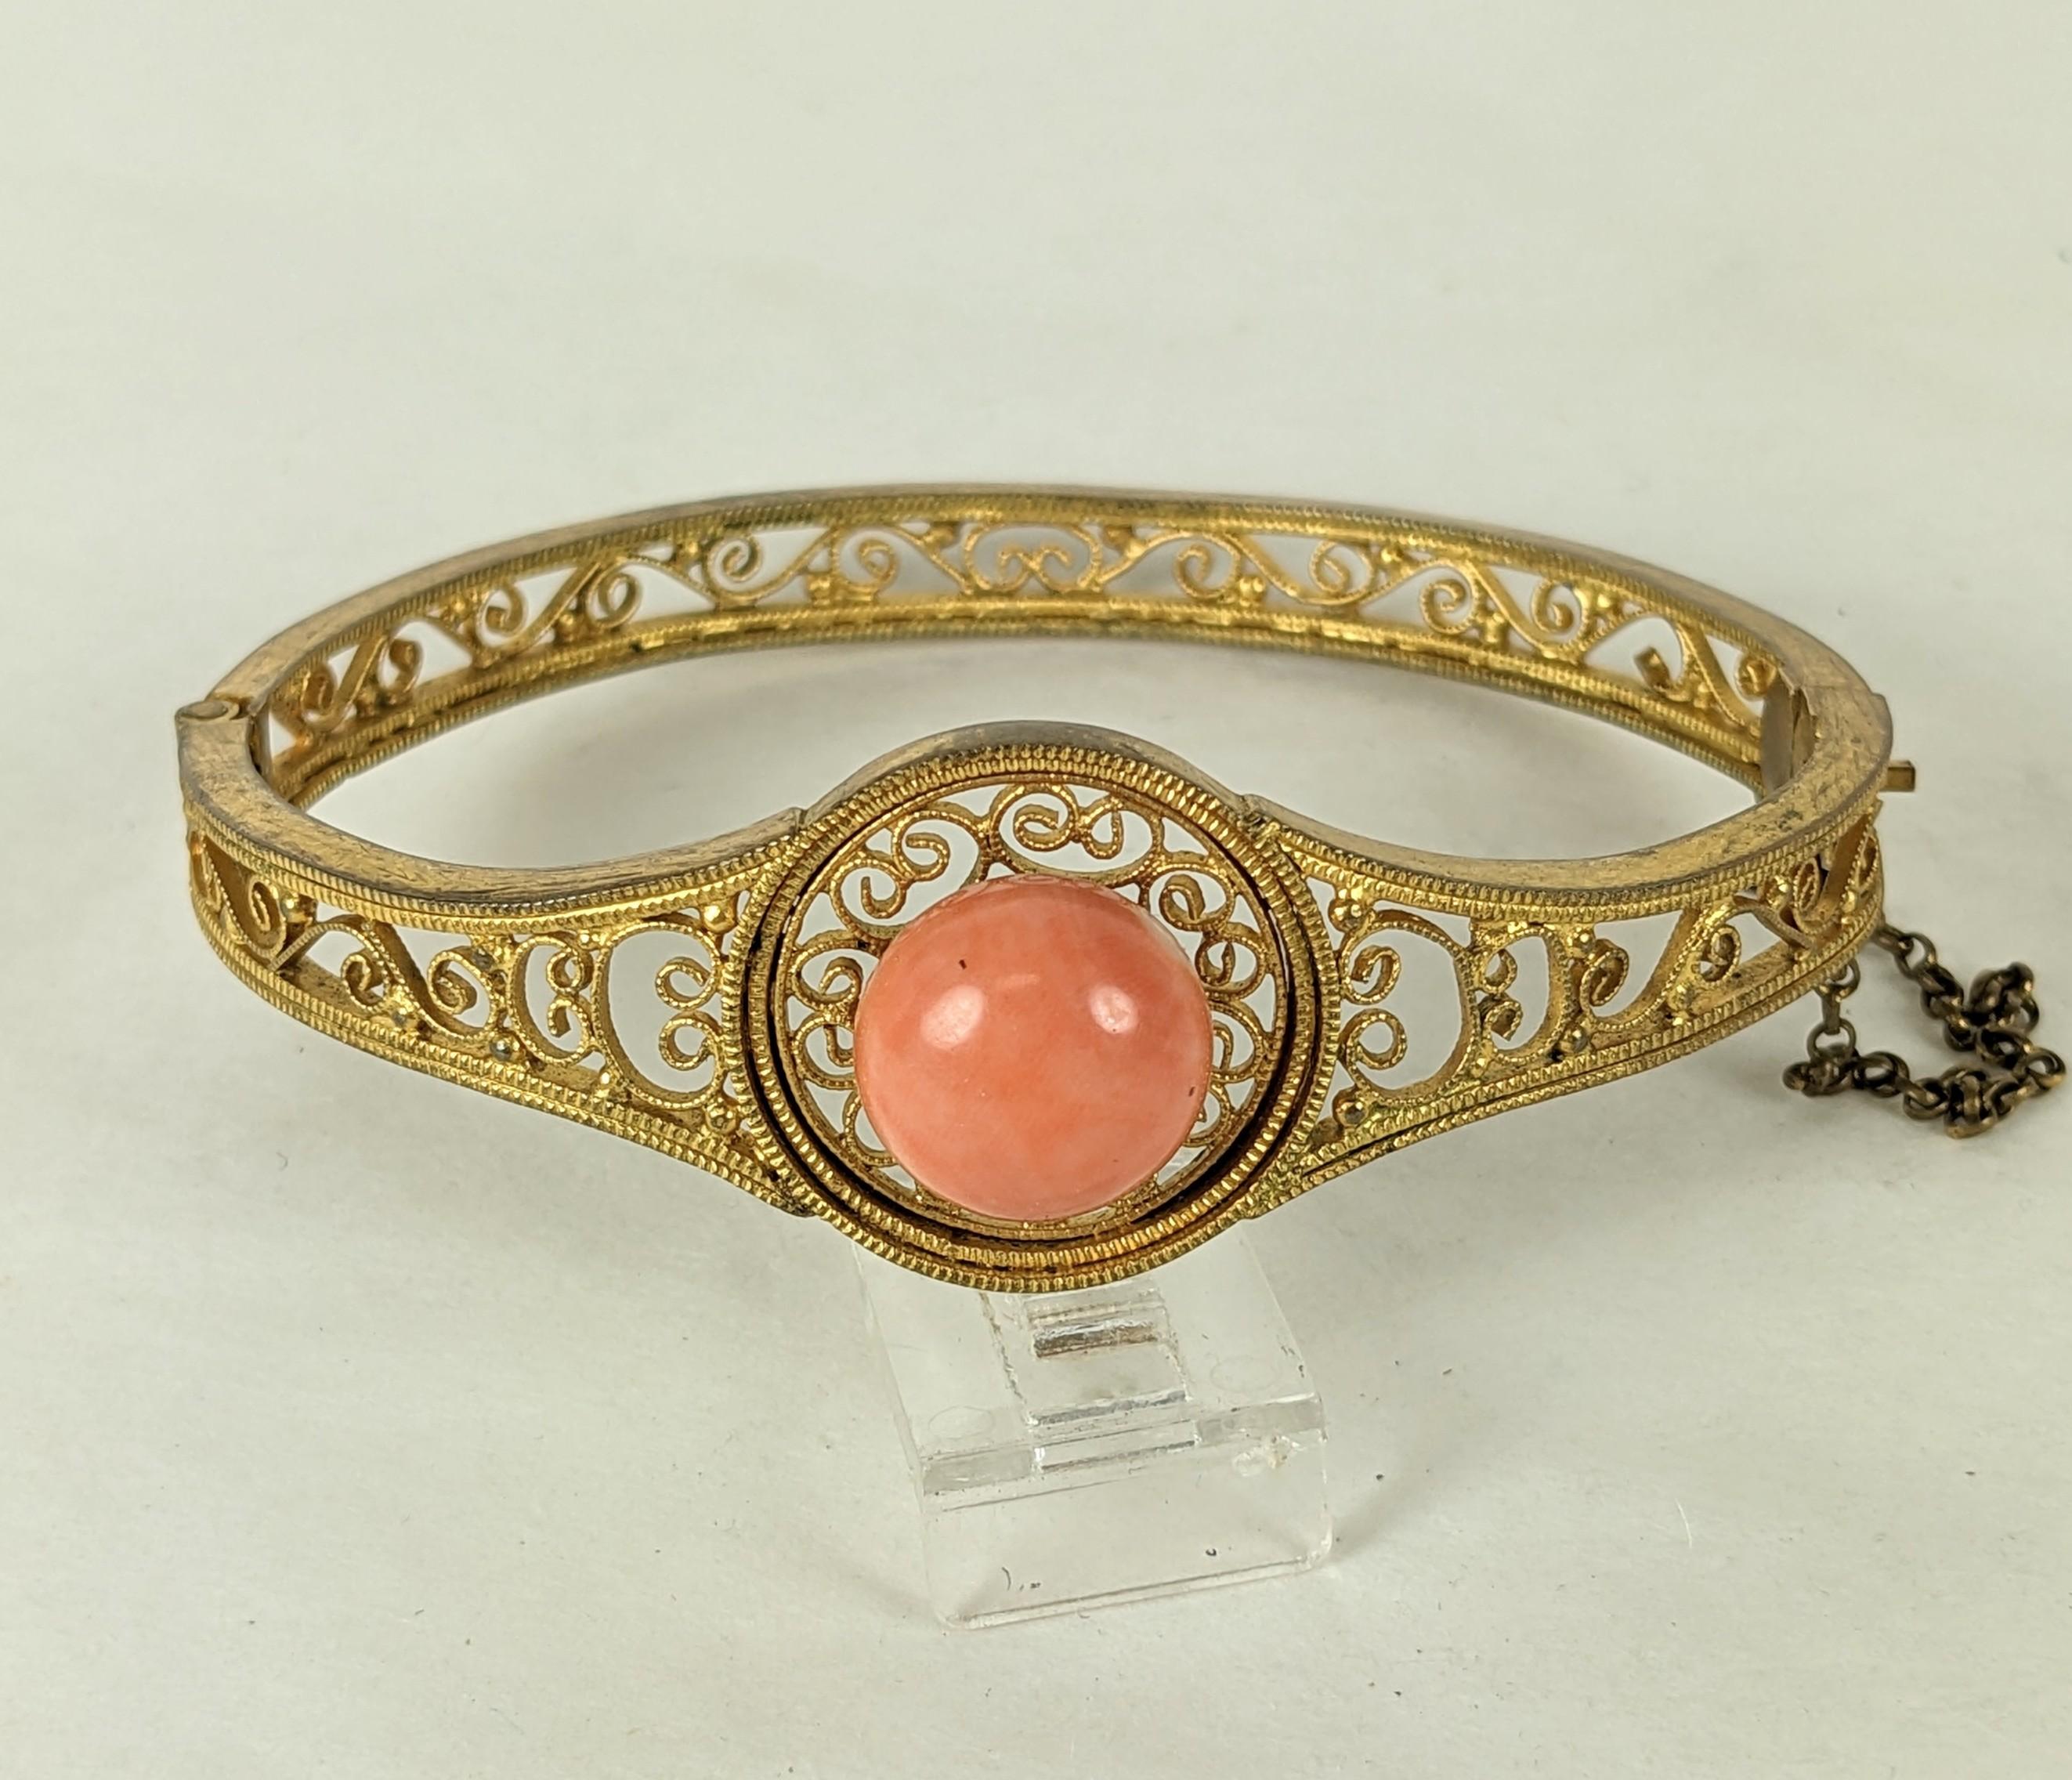 Unusual, elegant Etruscan Coral Bangle from the mid 19th Century. Hand made scroll work gold filled metal setting with genuine coral cab at center. .75